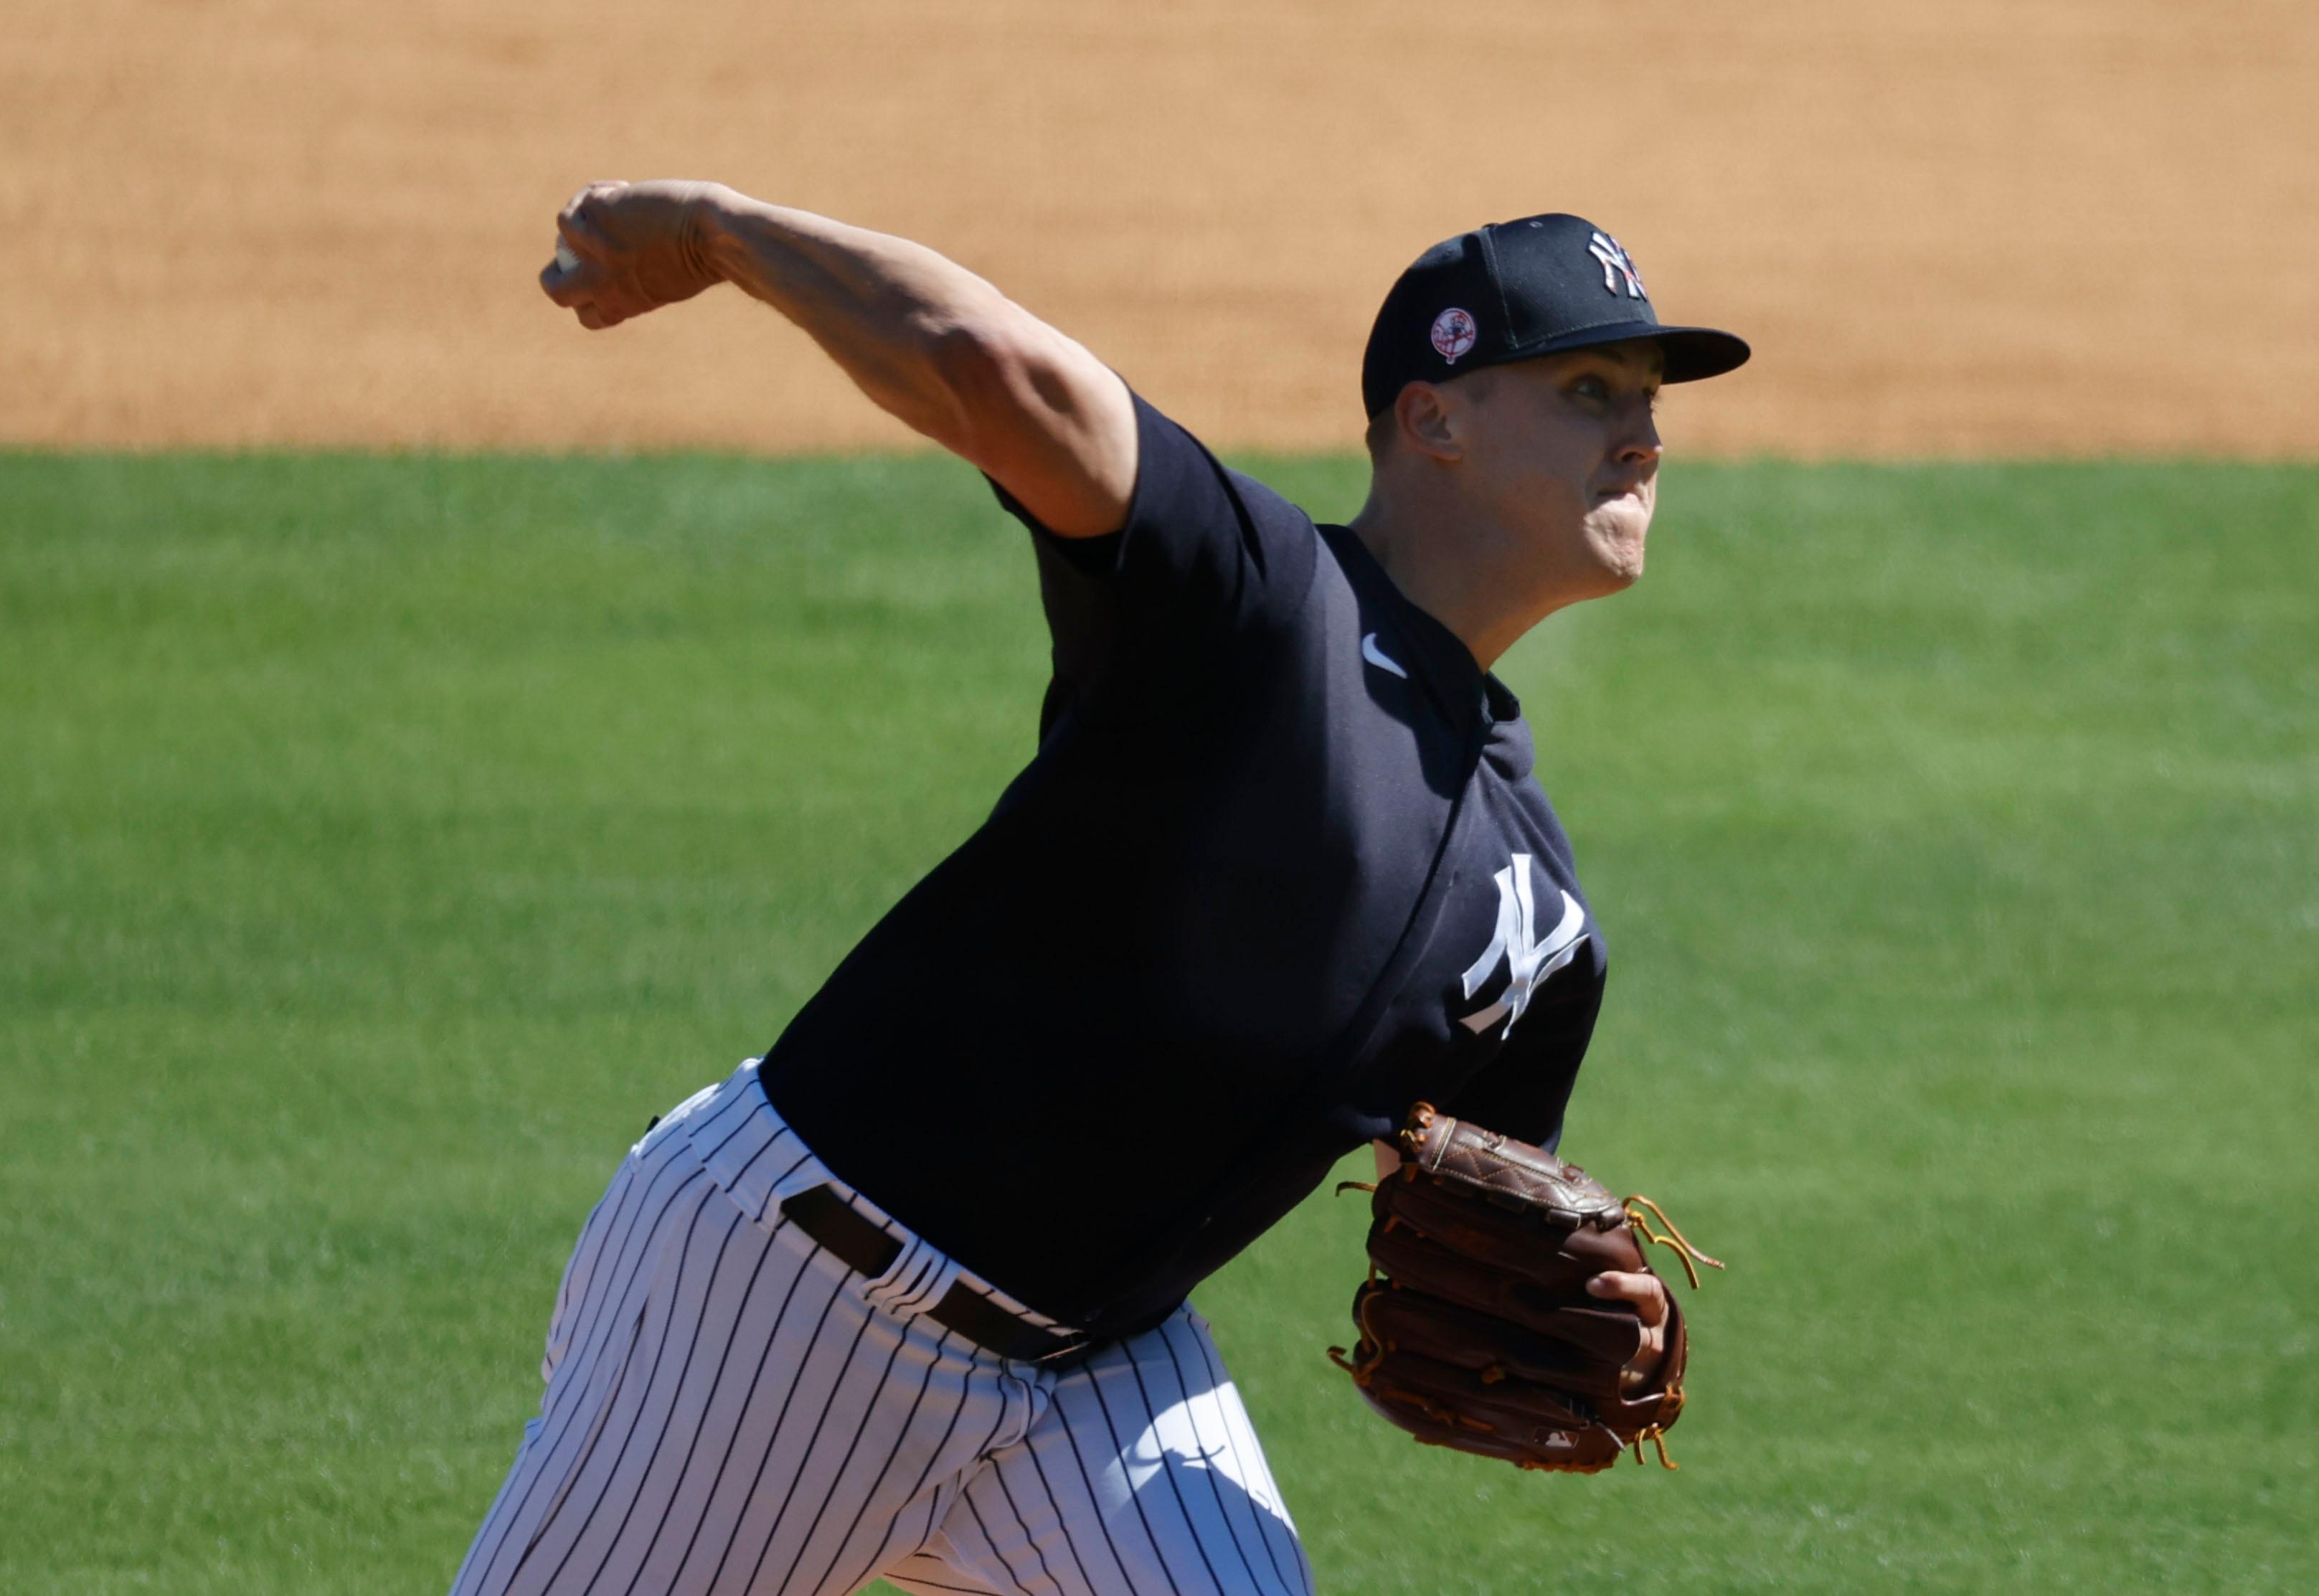 Feb 24, 2021; Tampa, Florida, USA; New York Yankees starting pitcher Jameson Taillon (50) throws a pitch during live batting practice during spring training workouts at George M. Steinbrenner Field. Mandatory Credit: Kim Klement-USA TODAY Sports / Kim Klement-USA TODAY Sports